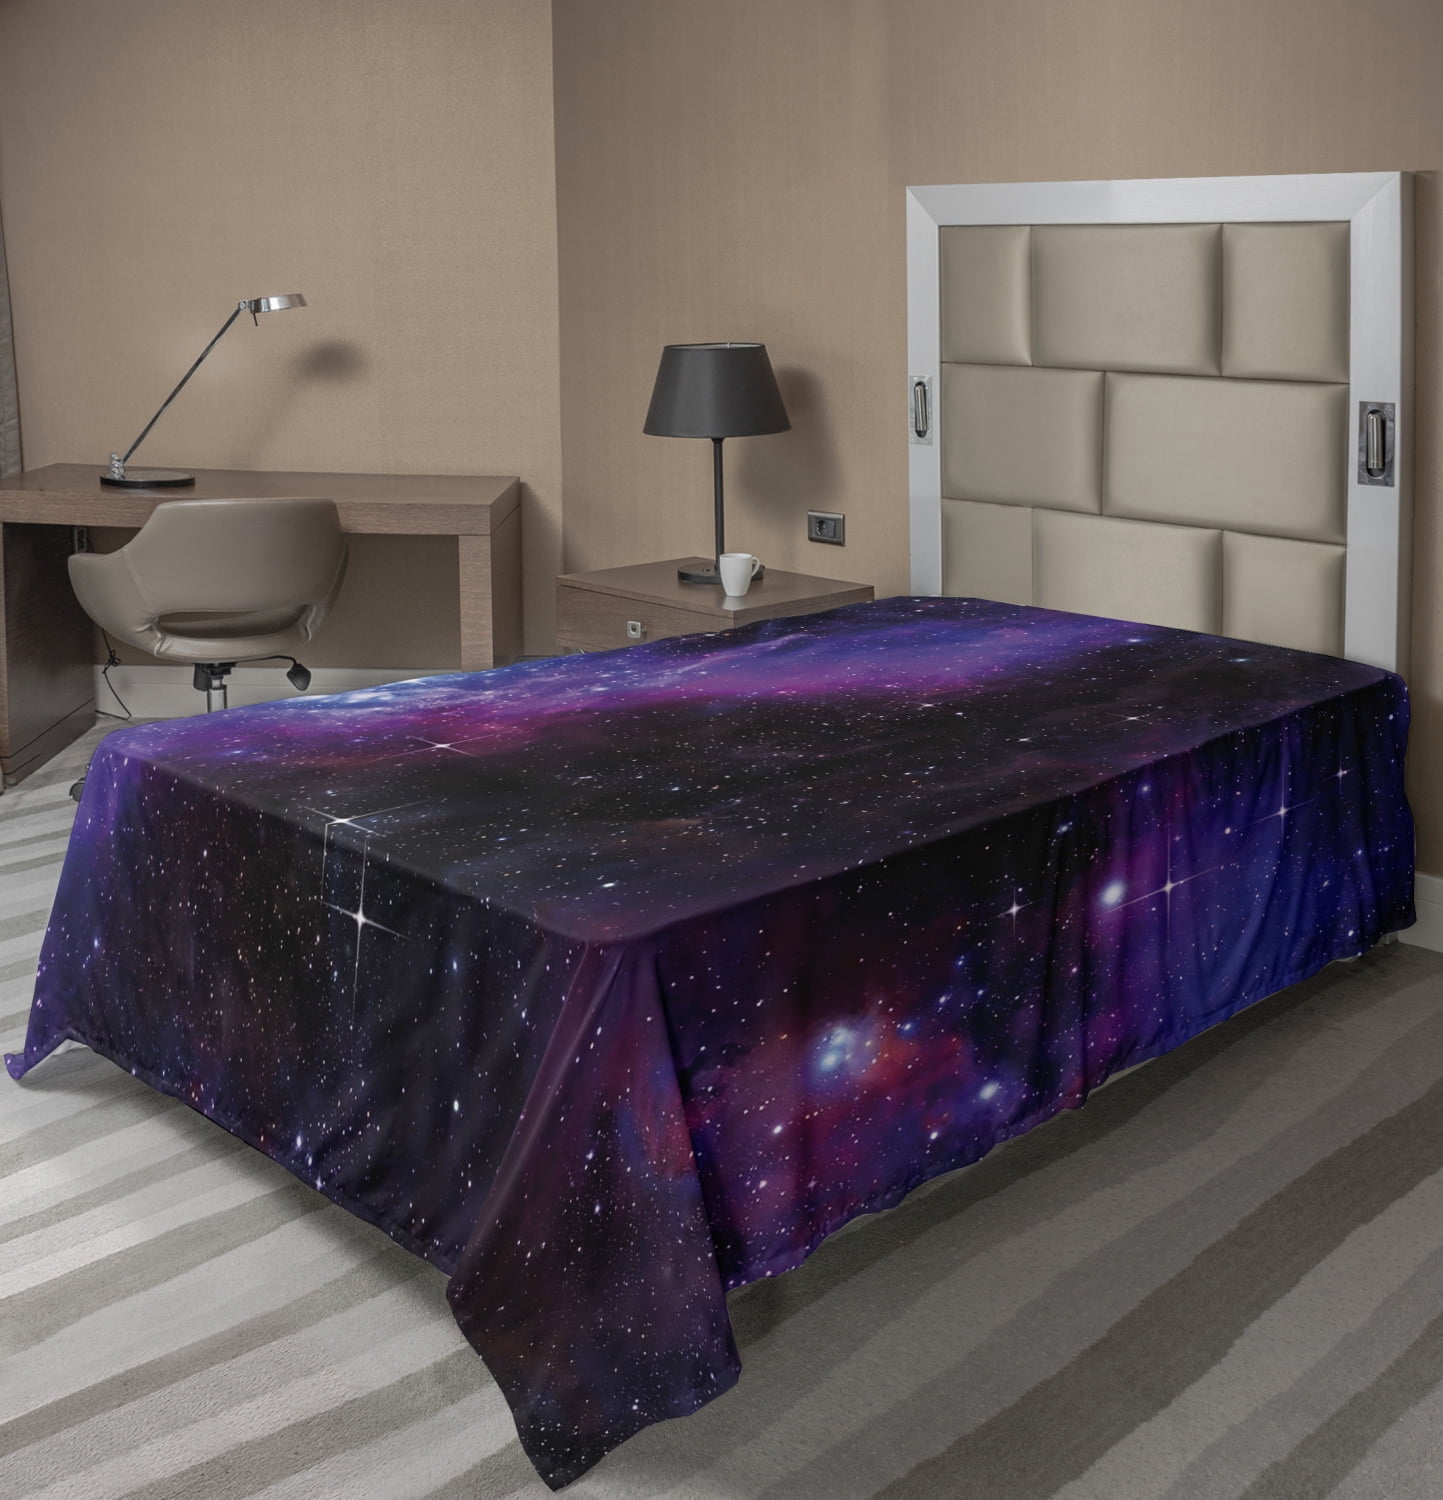 Decorative 2 Piece Bedding Set with 1 Pillow Sham Nebula Dark Galaxy with Luminous Stars and Cosmic Rays Astronomy Explore Theme Ambesonne Space Duvet Cover Set Twin Size Magenta Blue 